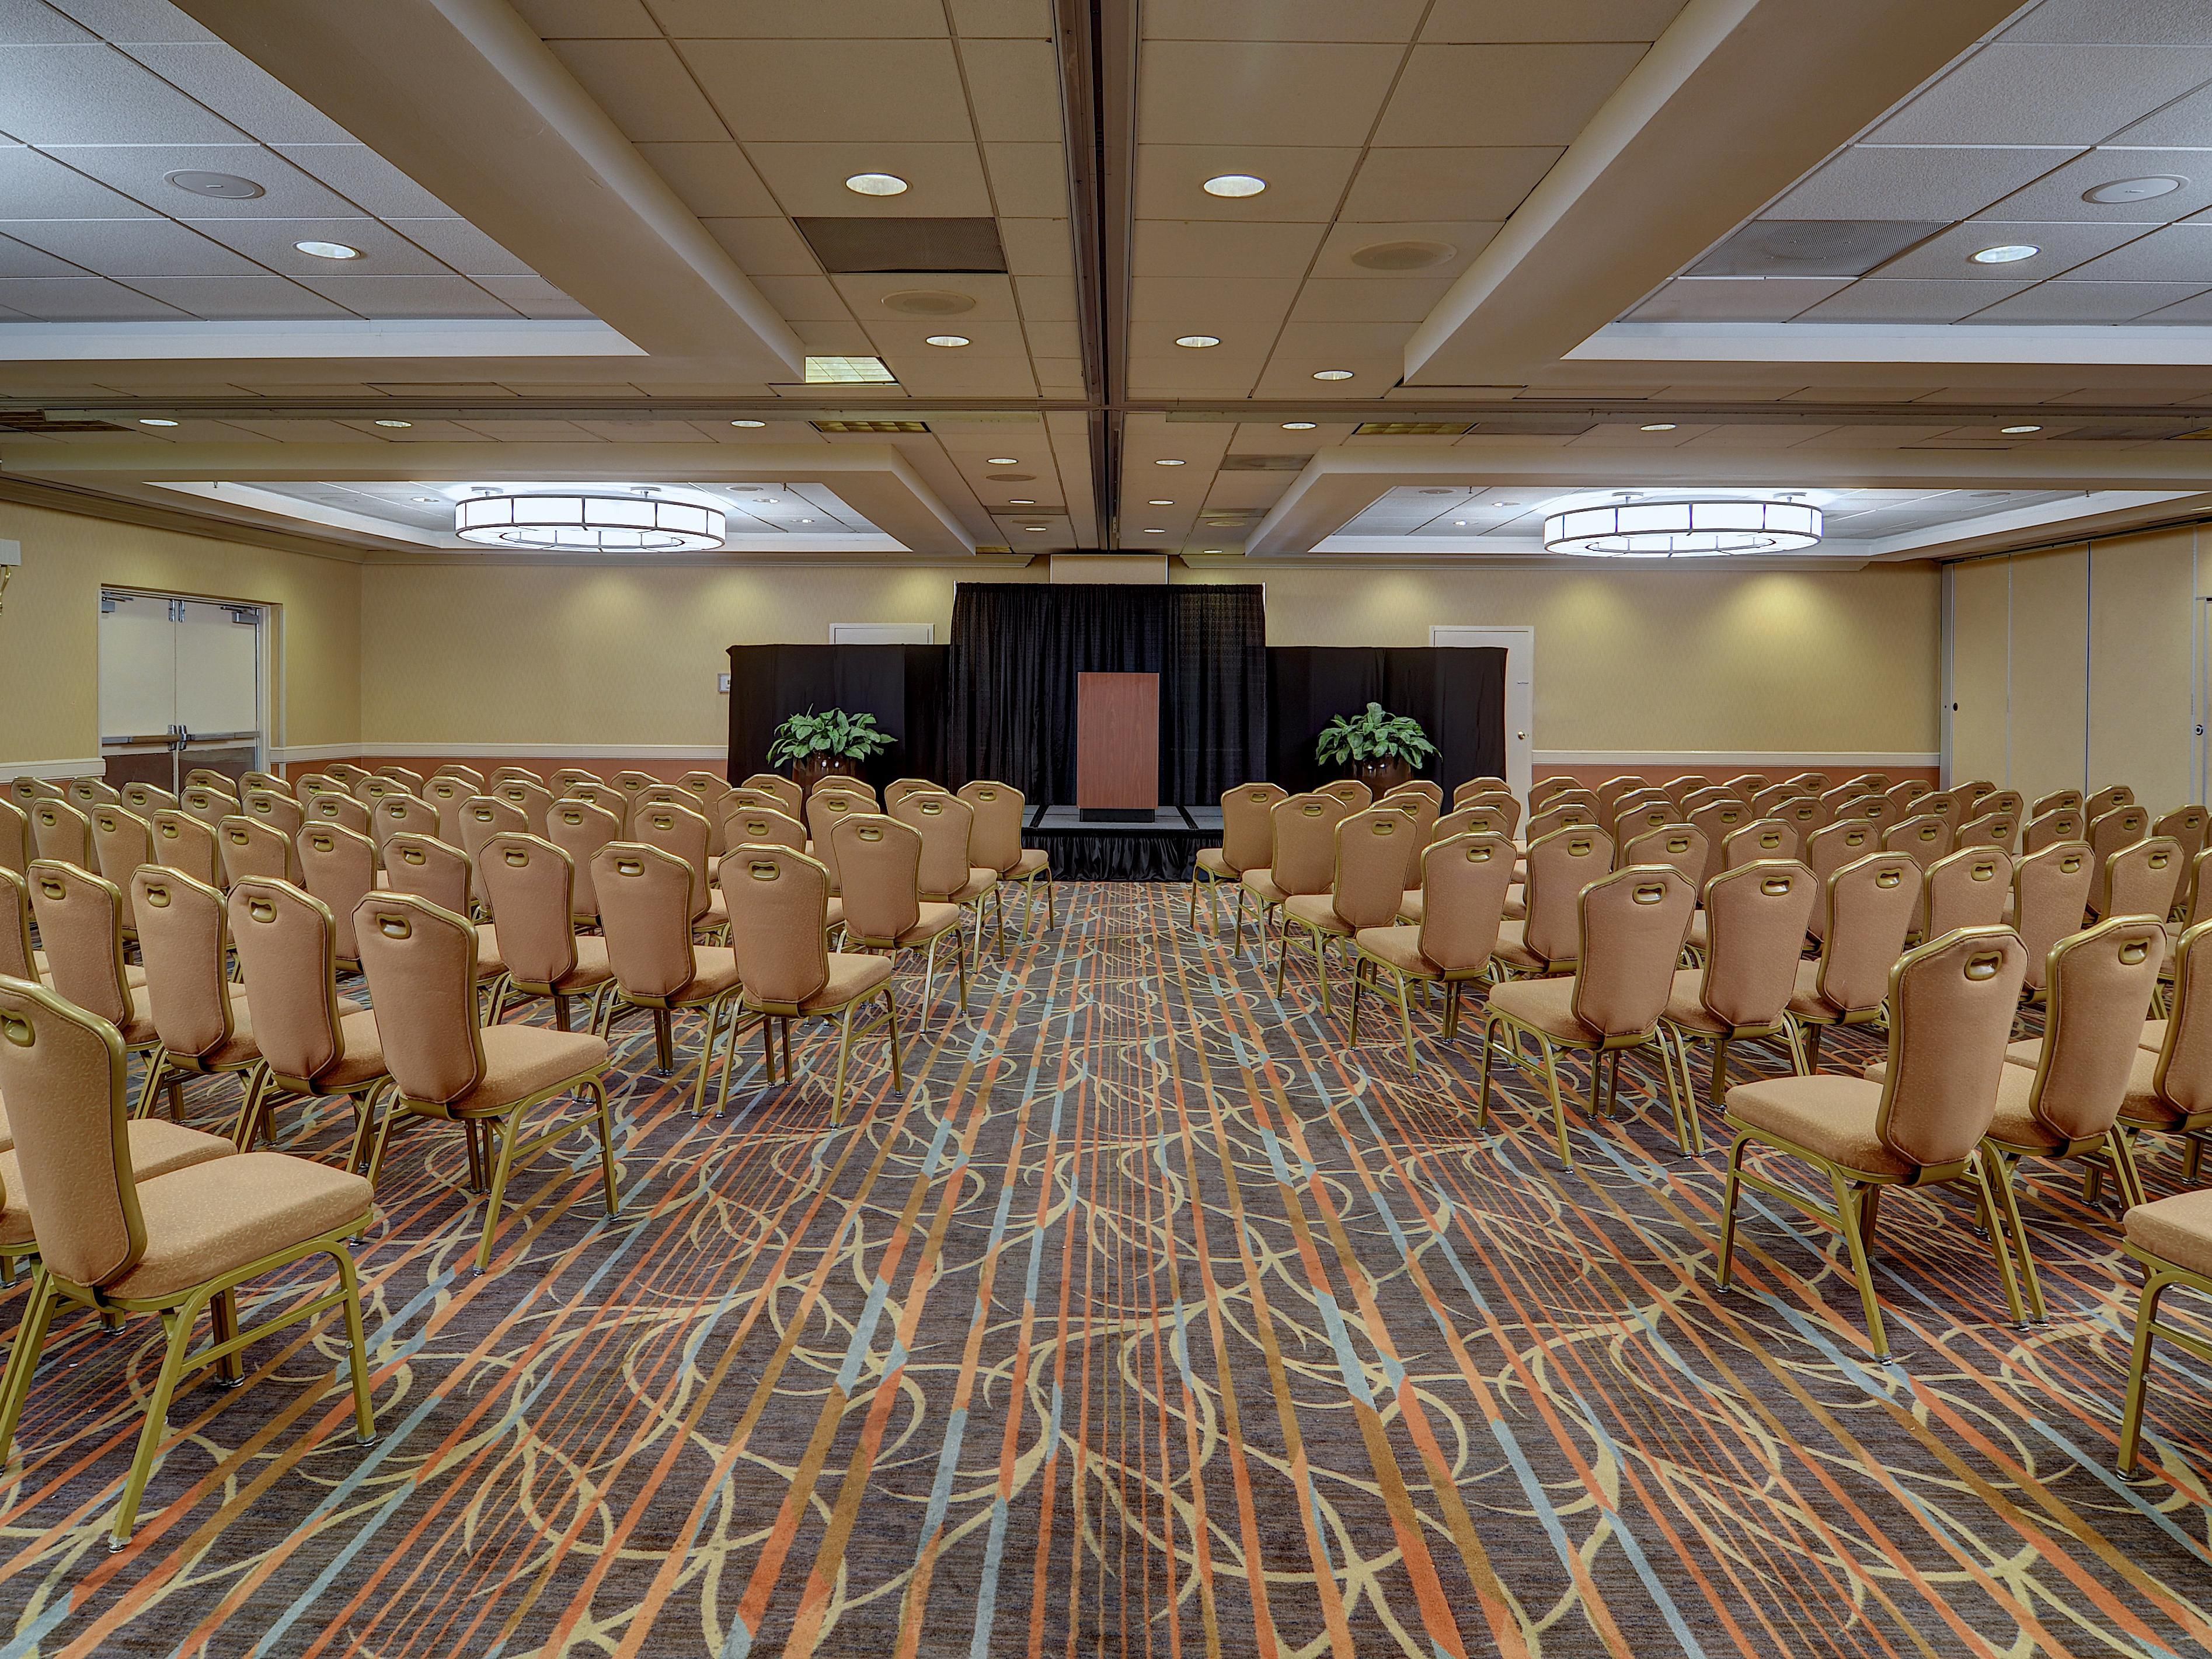 The Holiday Inn Gaithersburg combines 7,700 square feet of flexible meeting space options, with a skilled team of planning and service professionals in order to make meetings, banquets, and corporate events of any size a success.  Select the perfect space for your individual needs and enjoy delicious catering options to complement your meeting.  